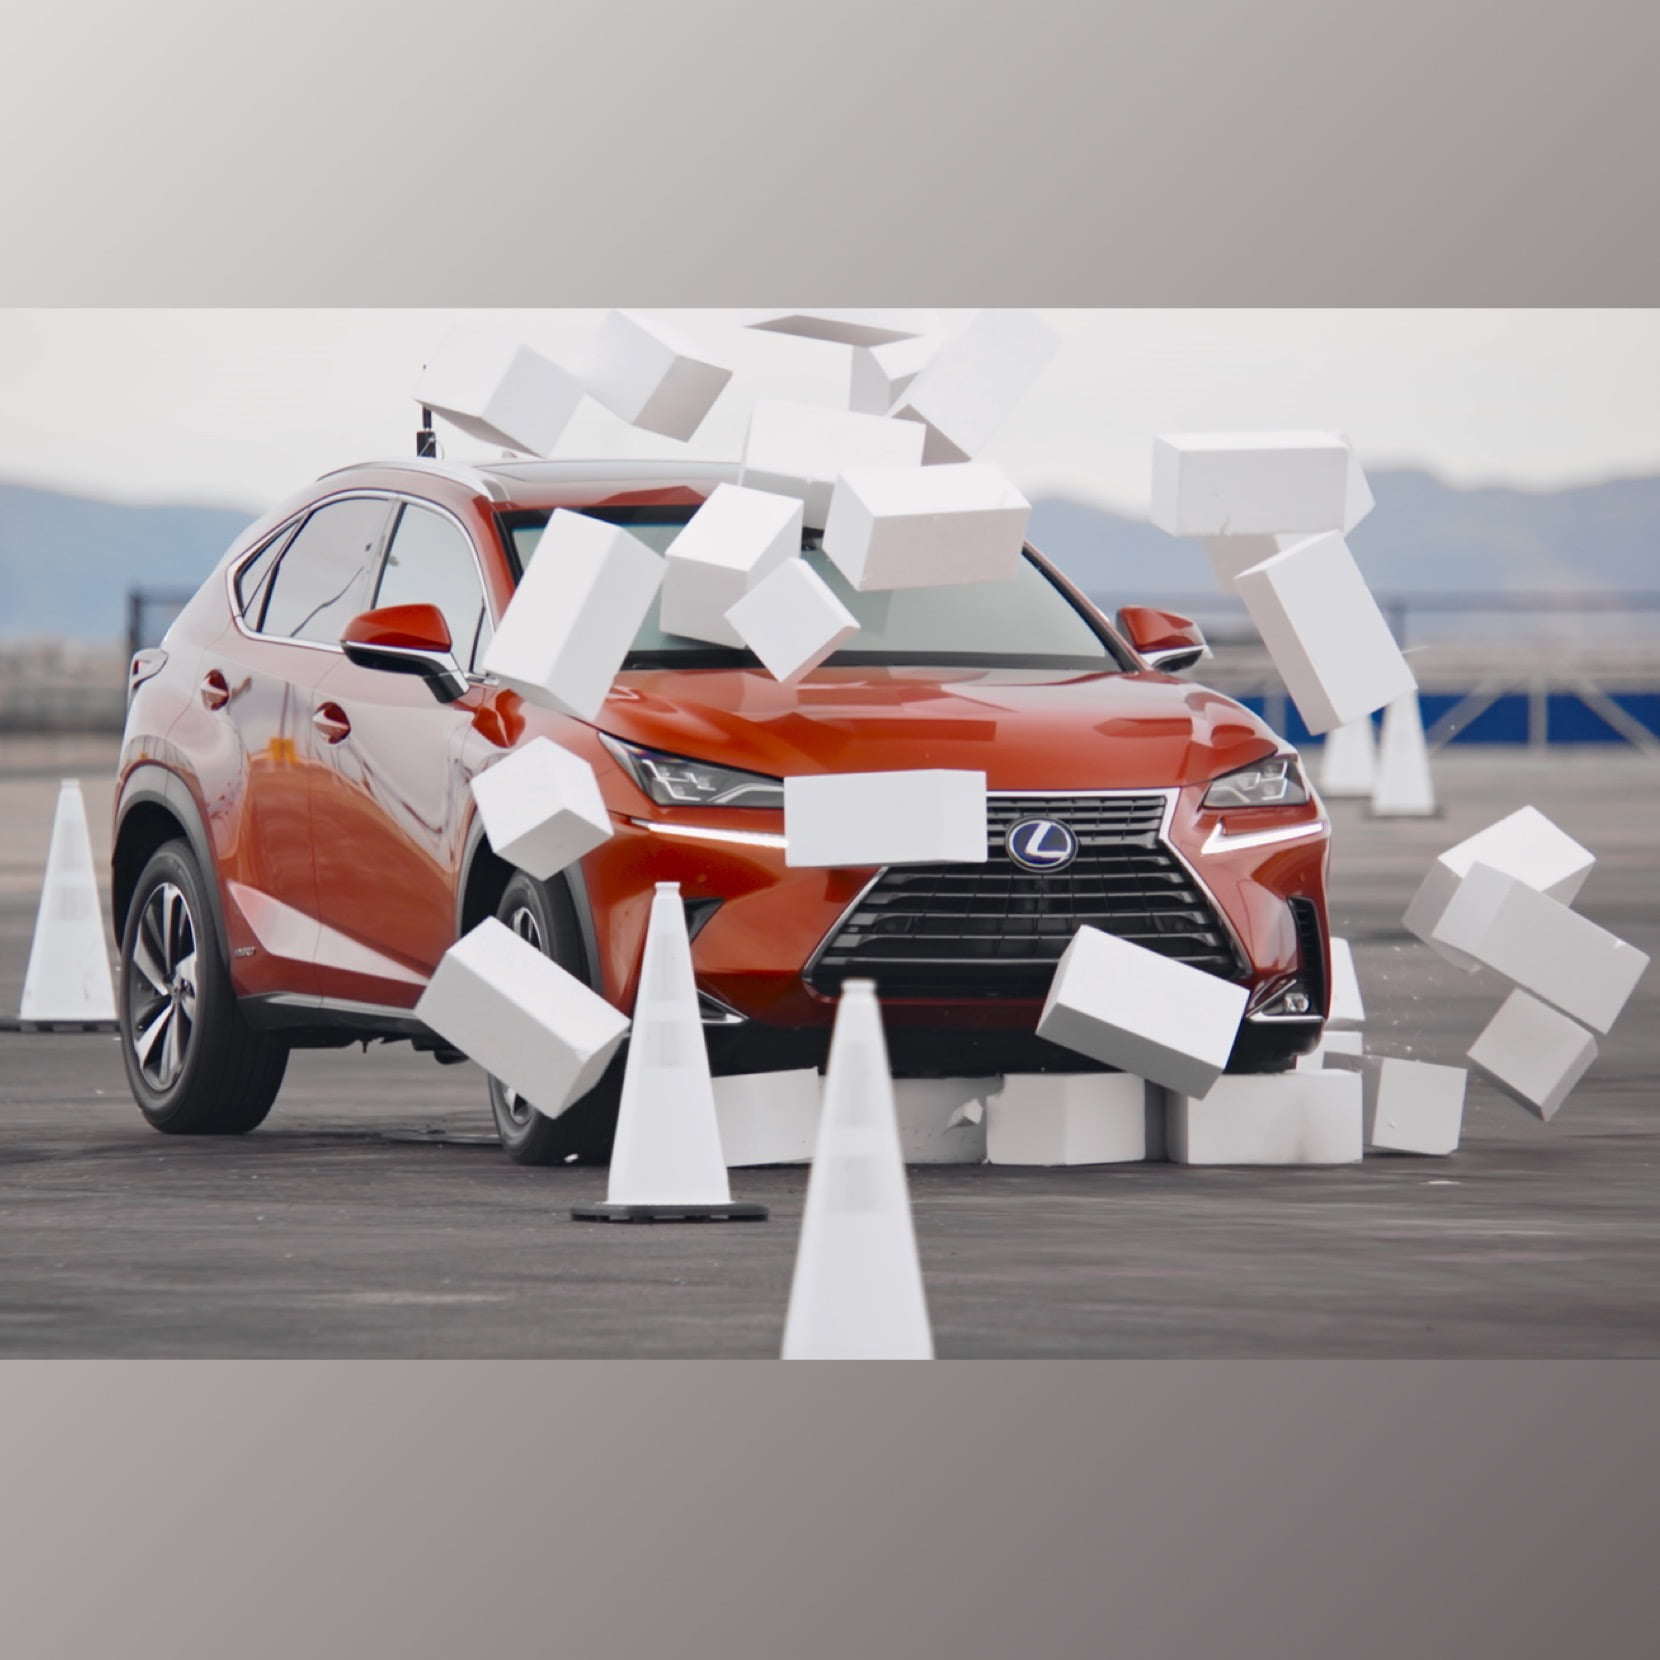 Driving Disrupted press image longform 2 by Lexus for use by 360 MAGAZINE